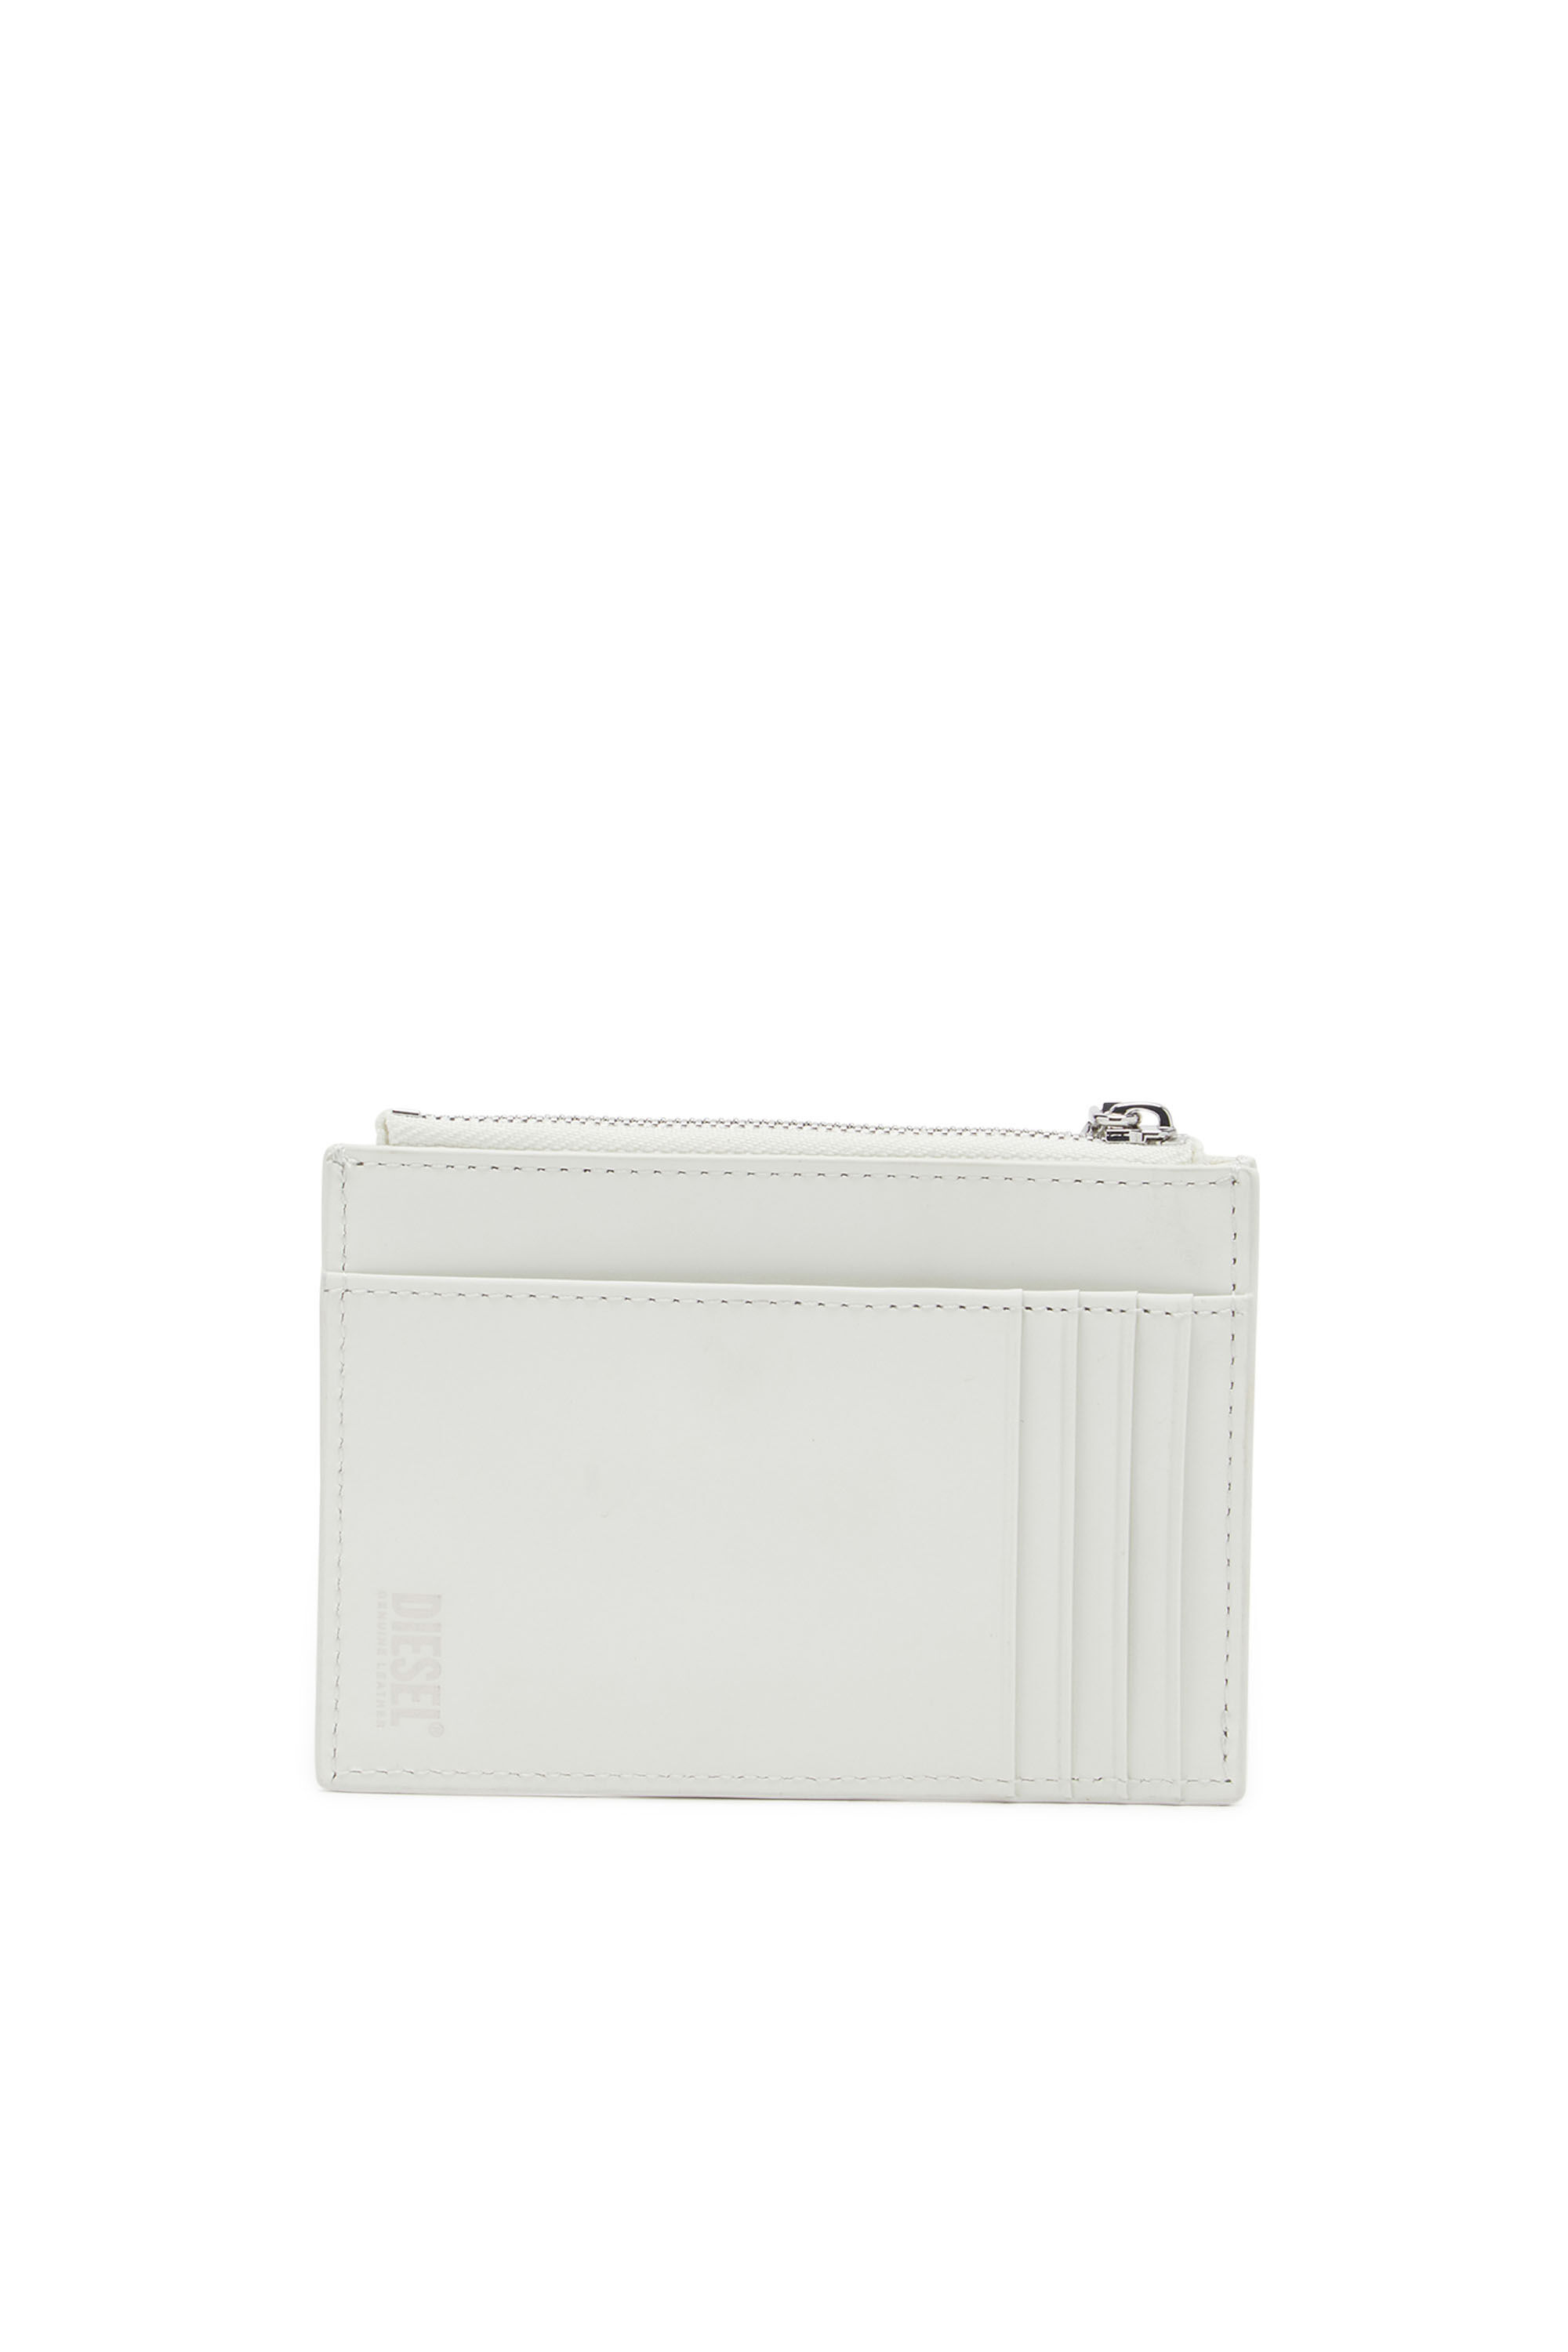 Diesel - 1DR CARD HOLDER I, Woman Card holder in matte leather in White - Image 2